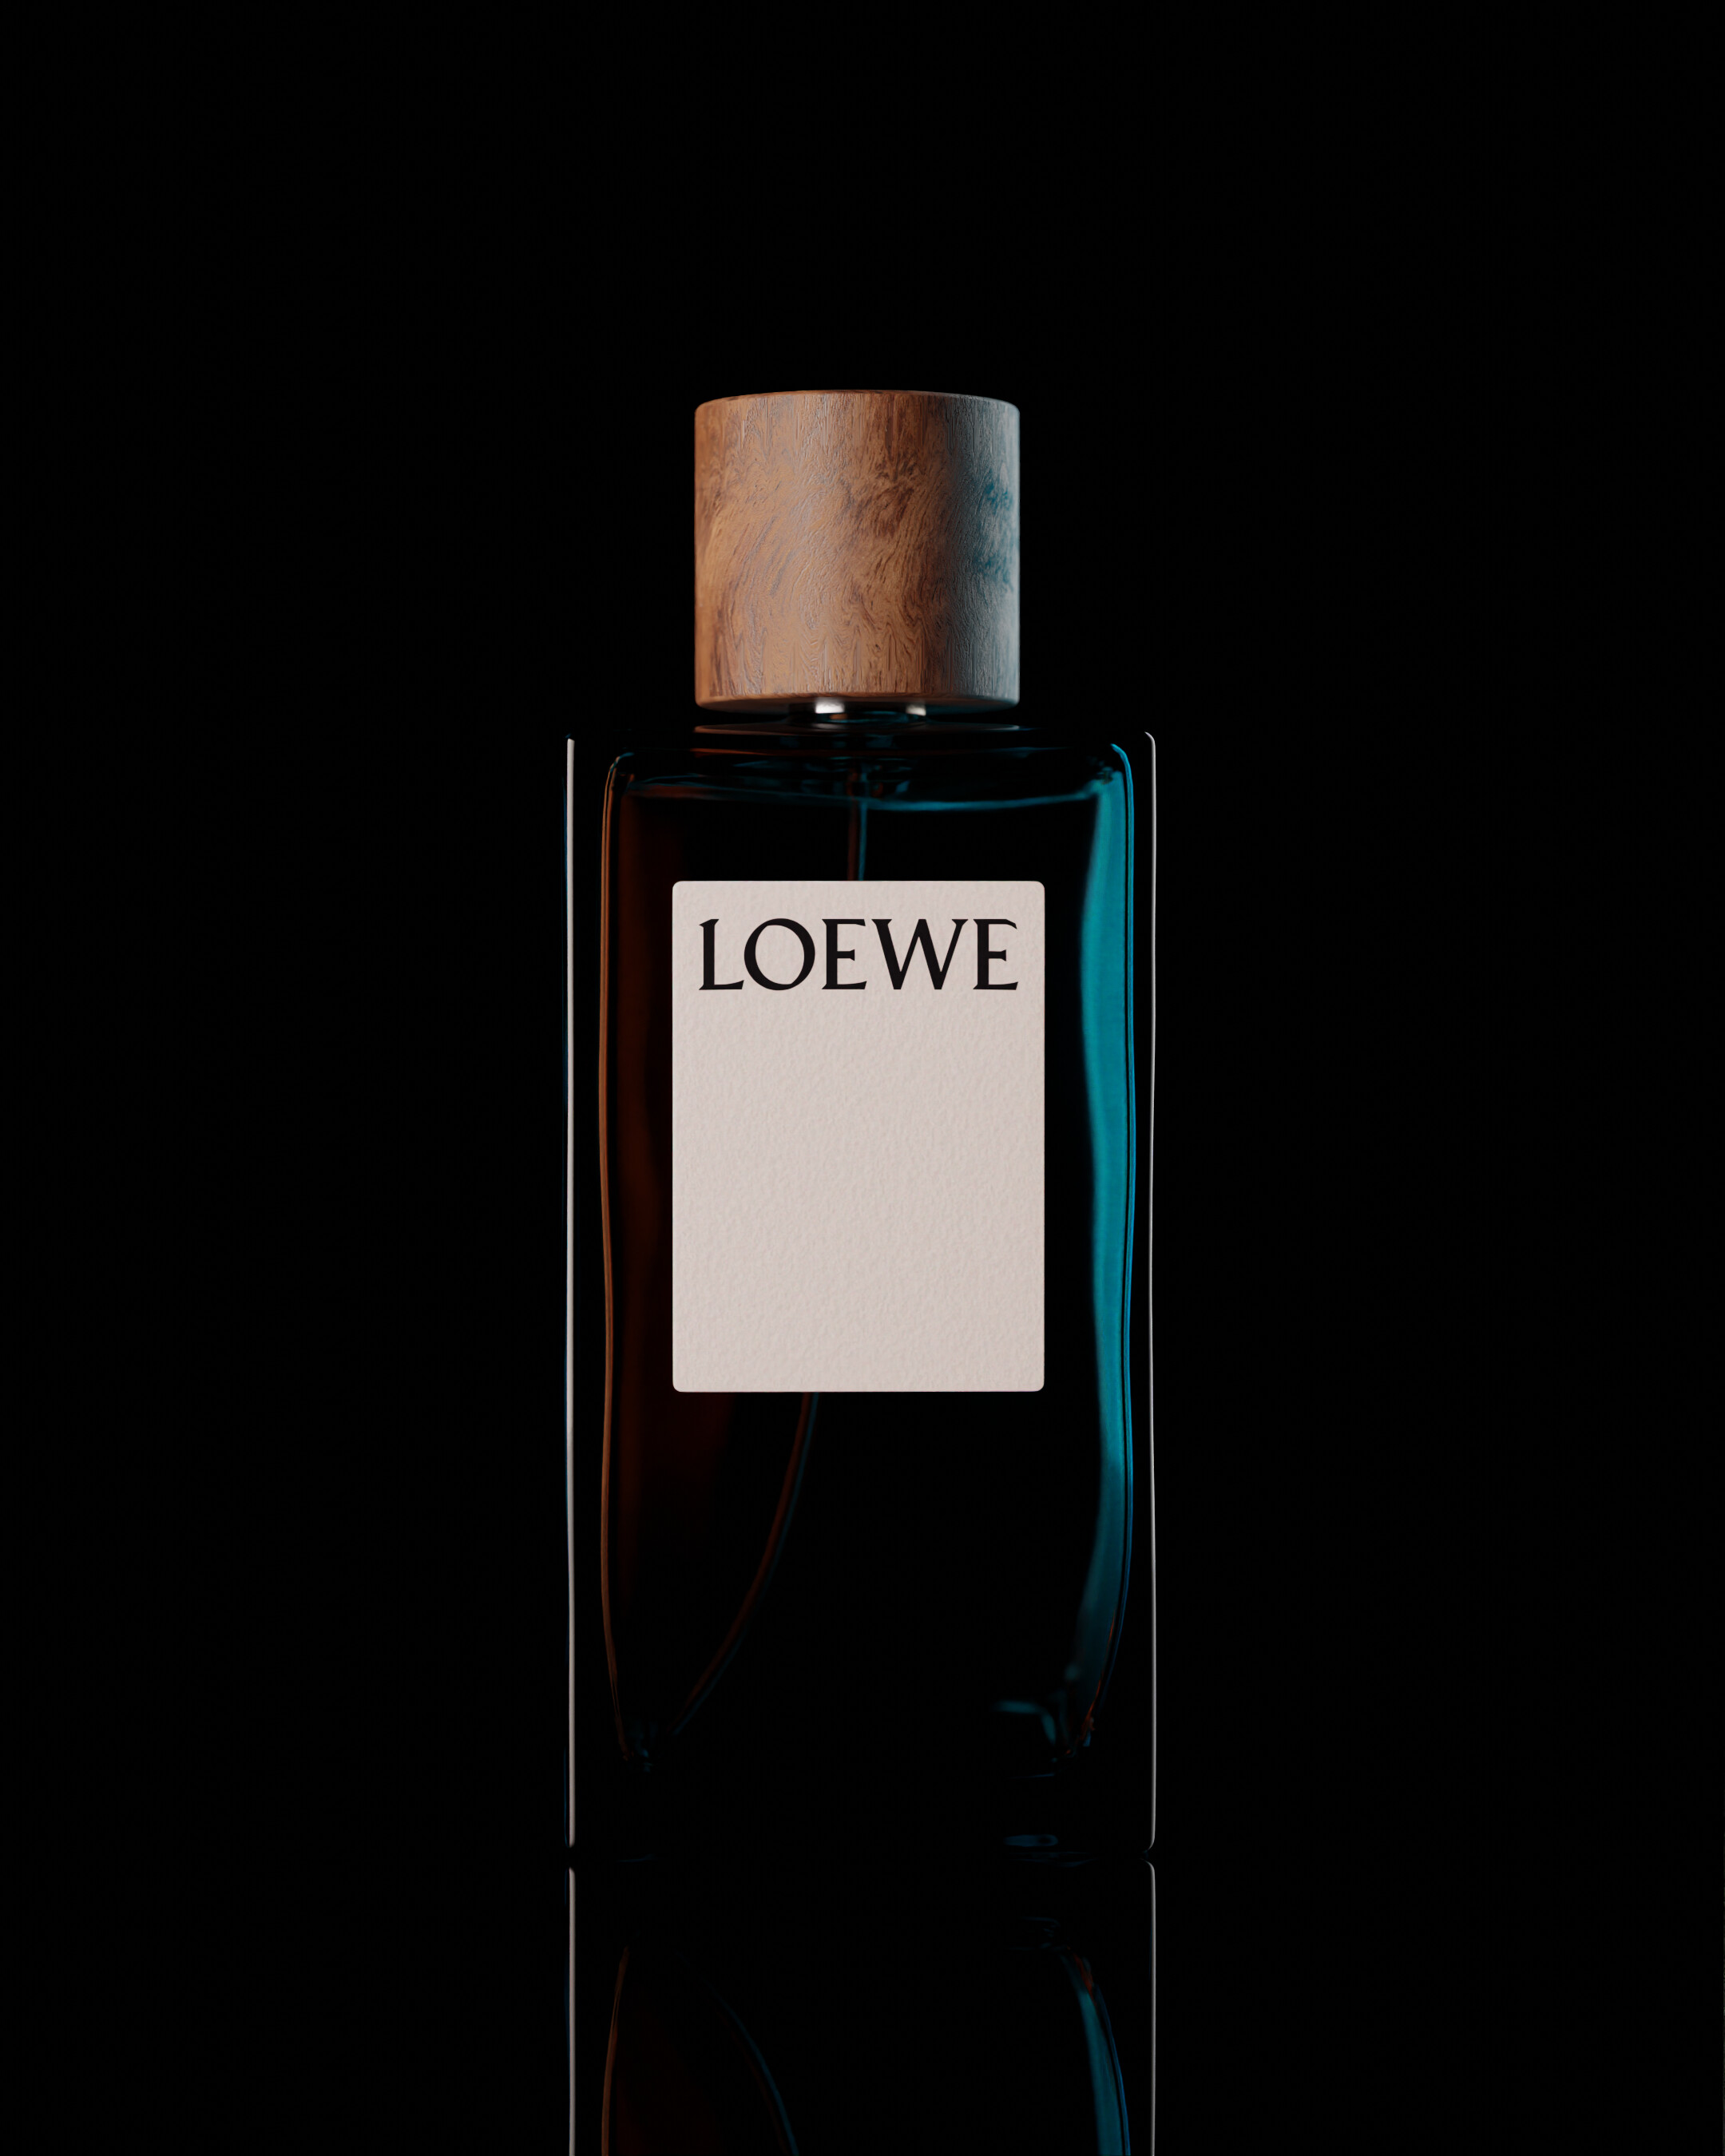 Loewe Parfum - A Light Group Study - Finished Projects - Blender Artists  Community